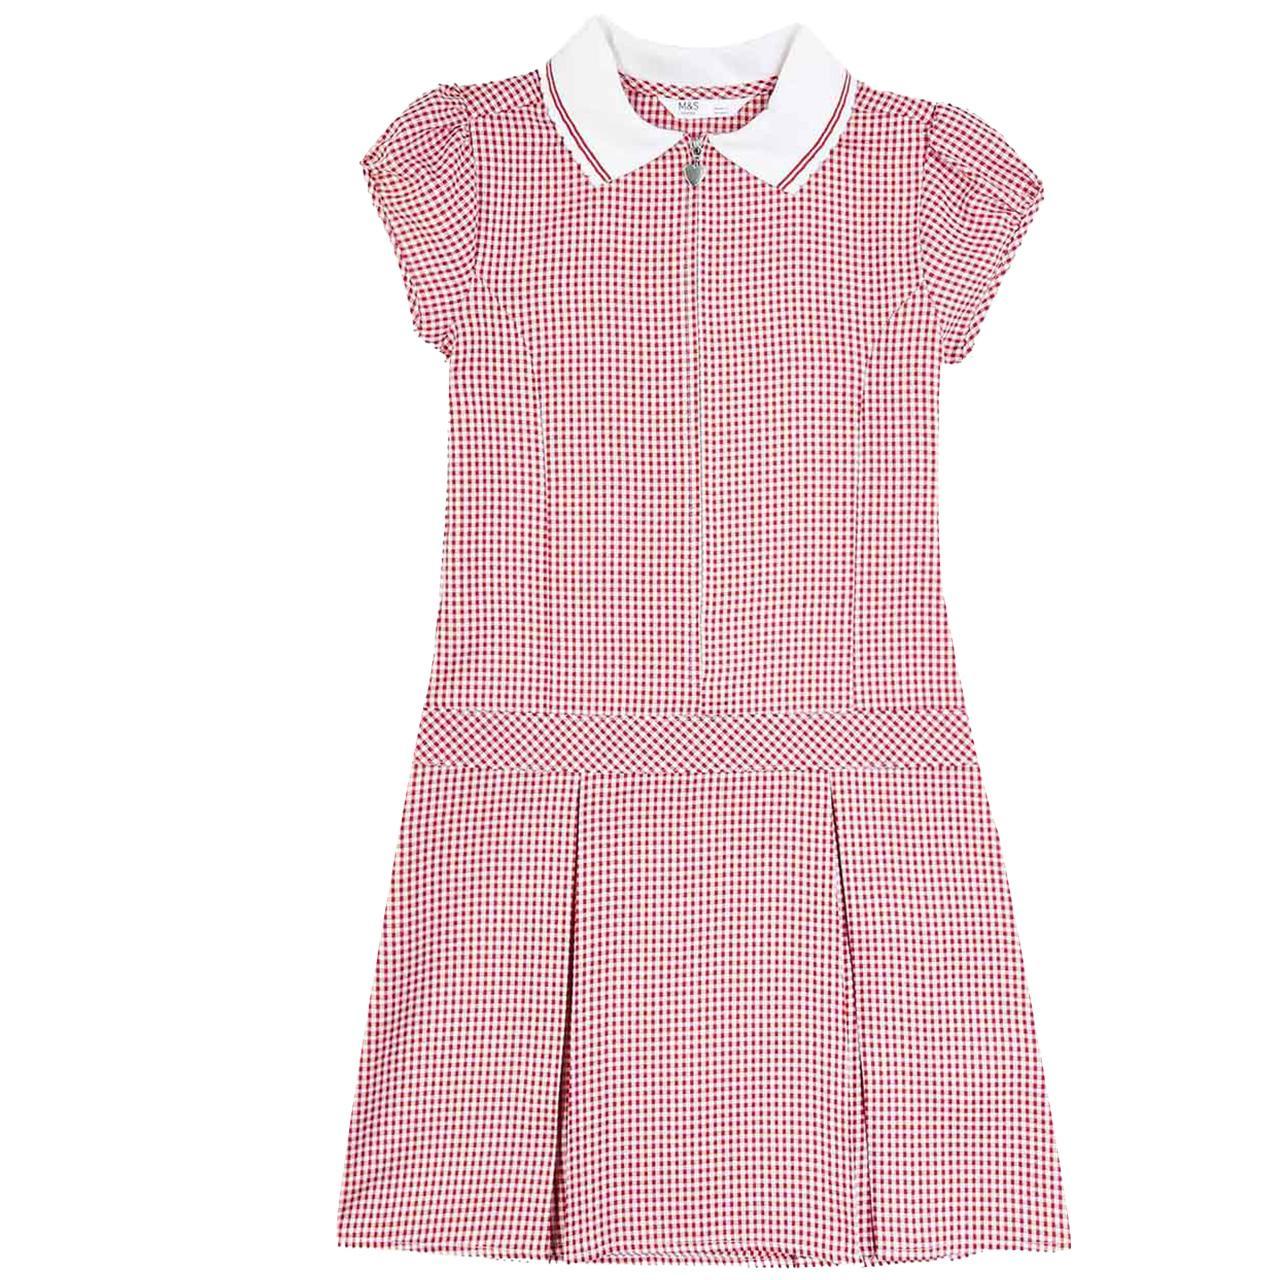 Summer dress - red gingham - M&S 11-12 Yrs